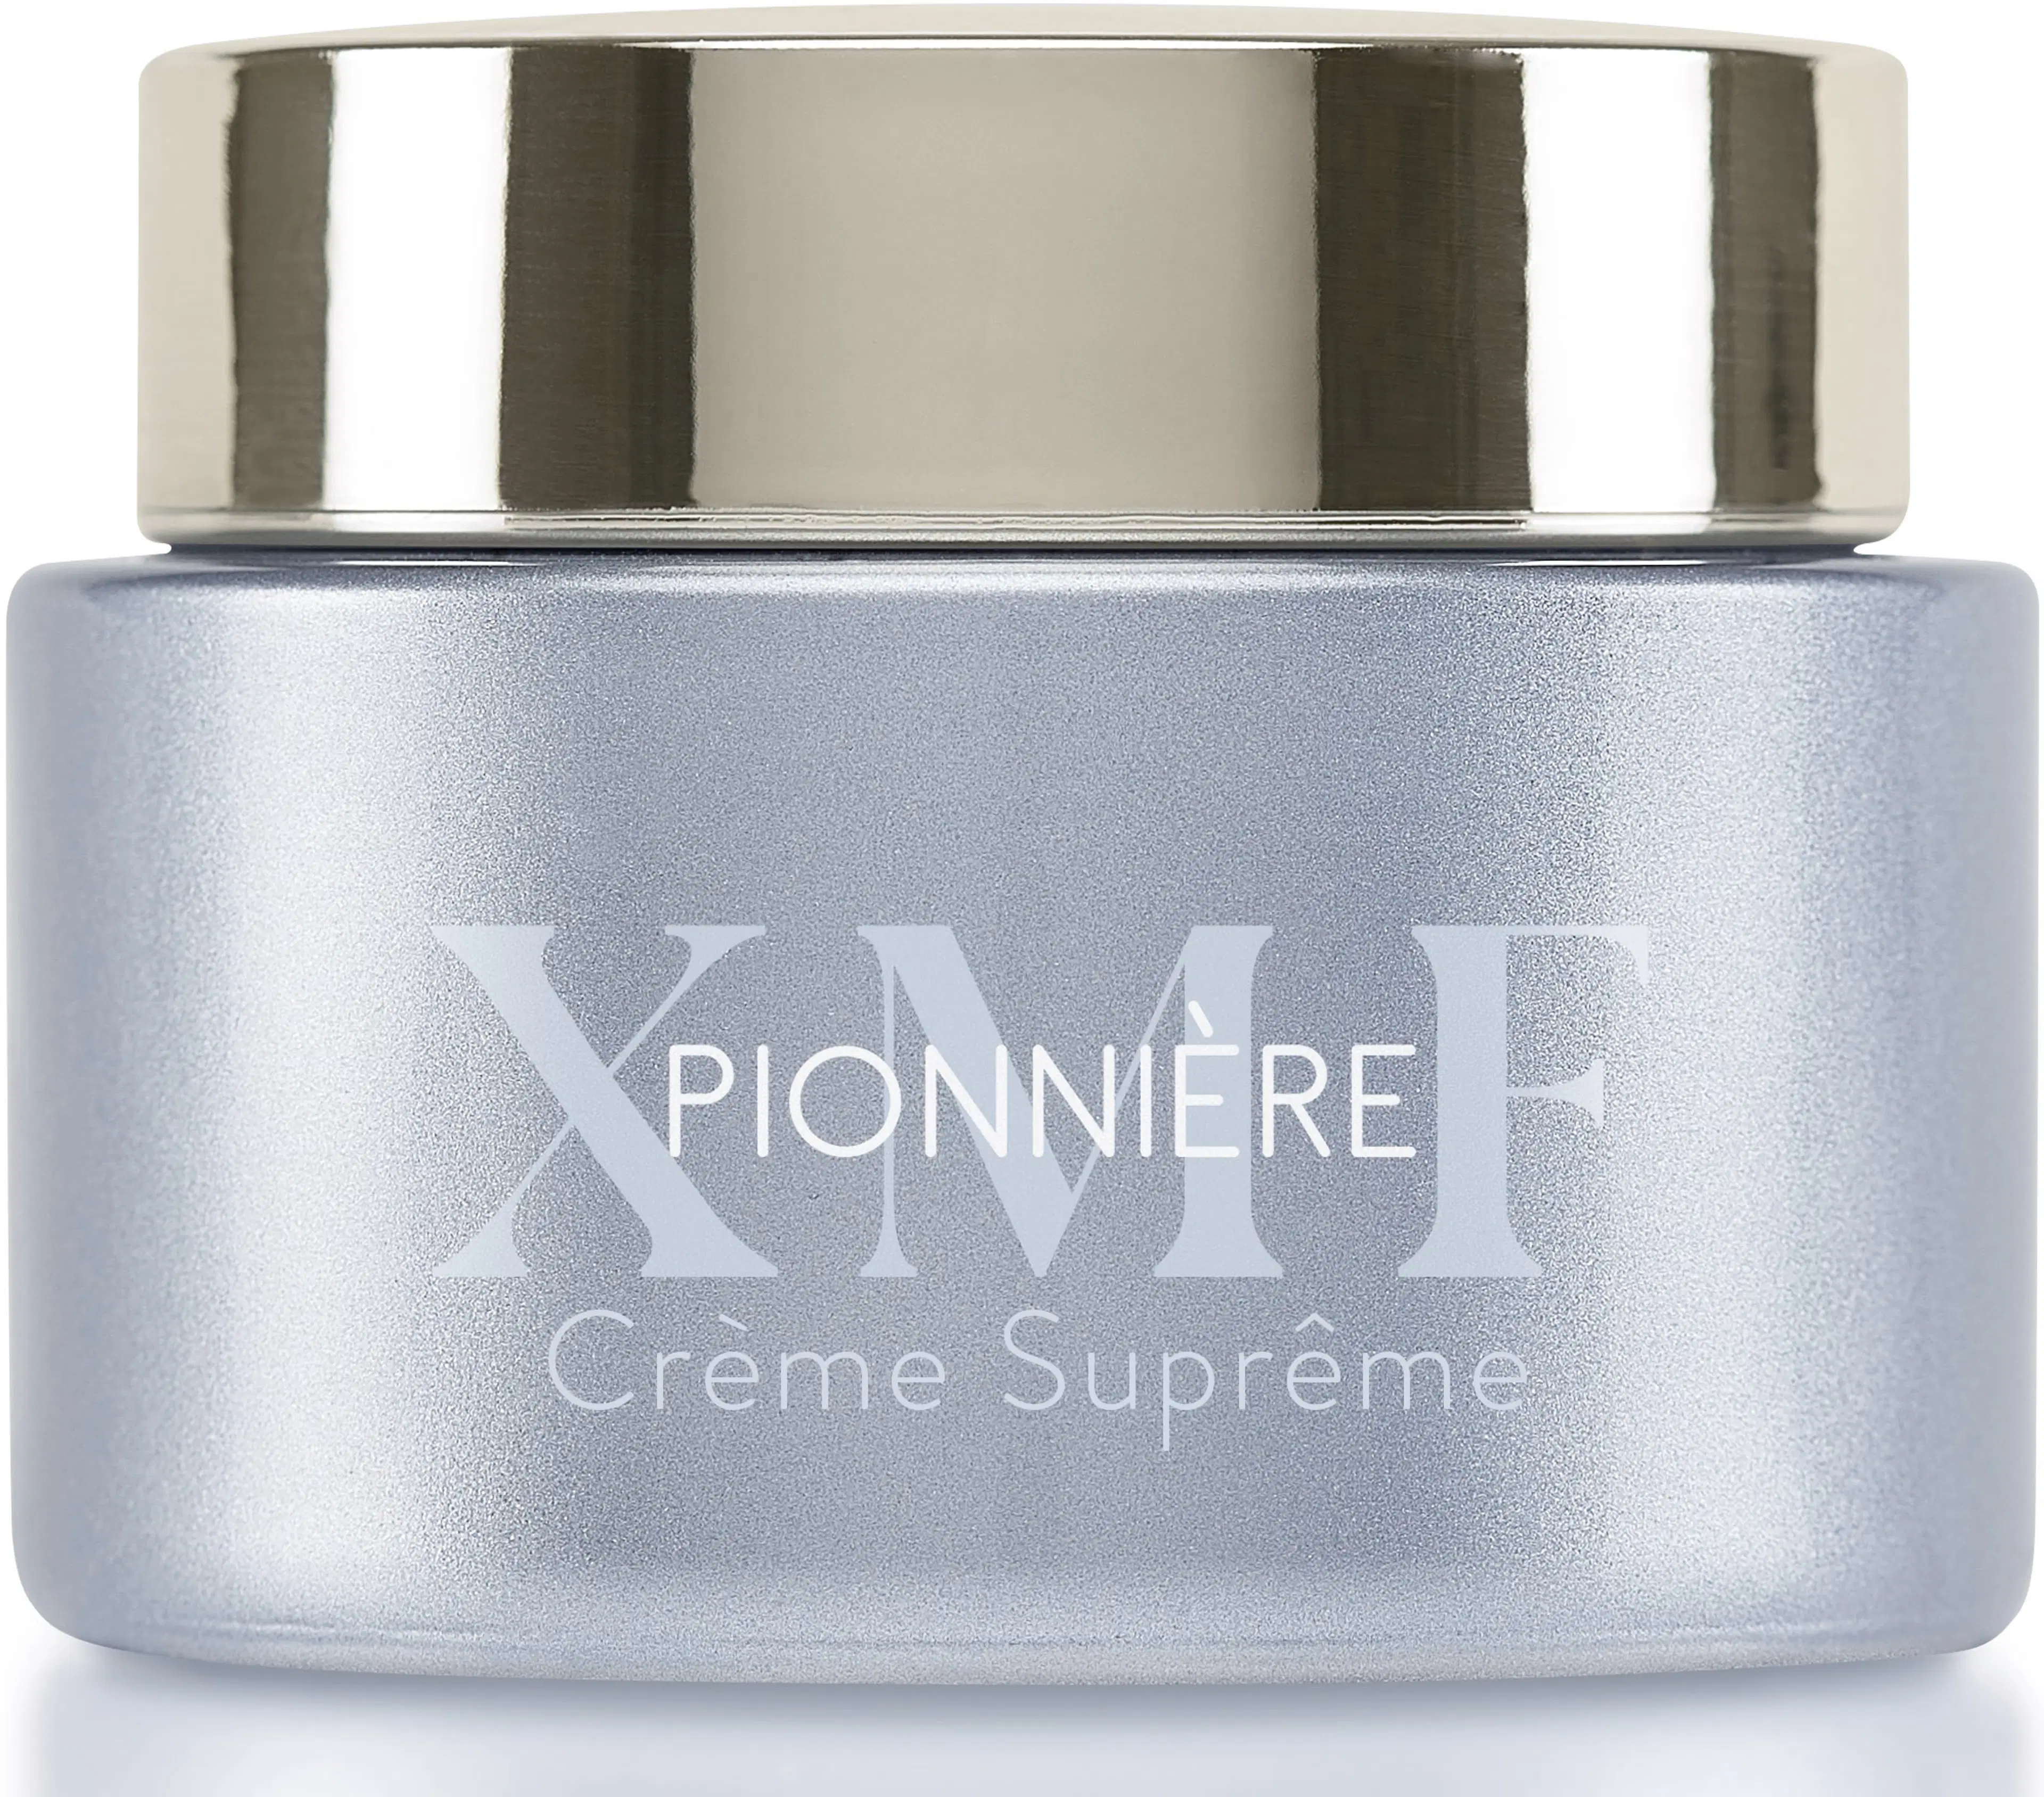 Phytomer Pionnière XMF Supreme hoitovoide 50 ml